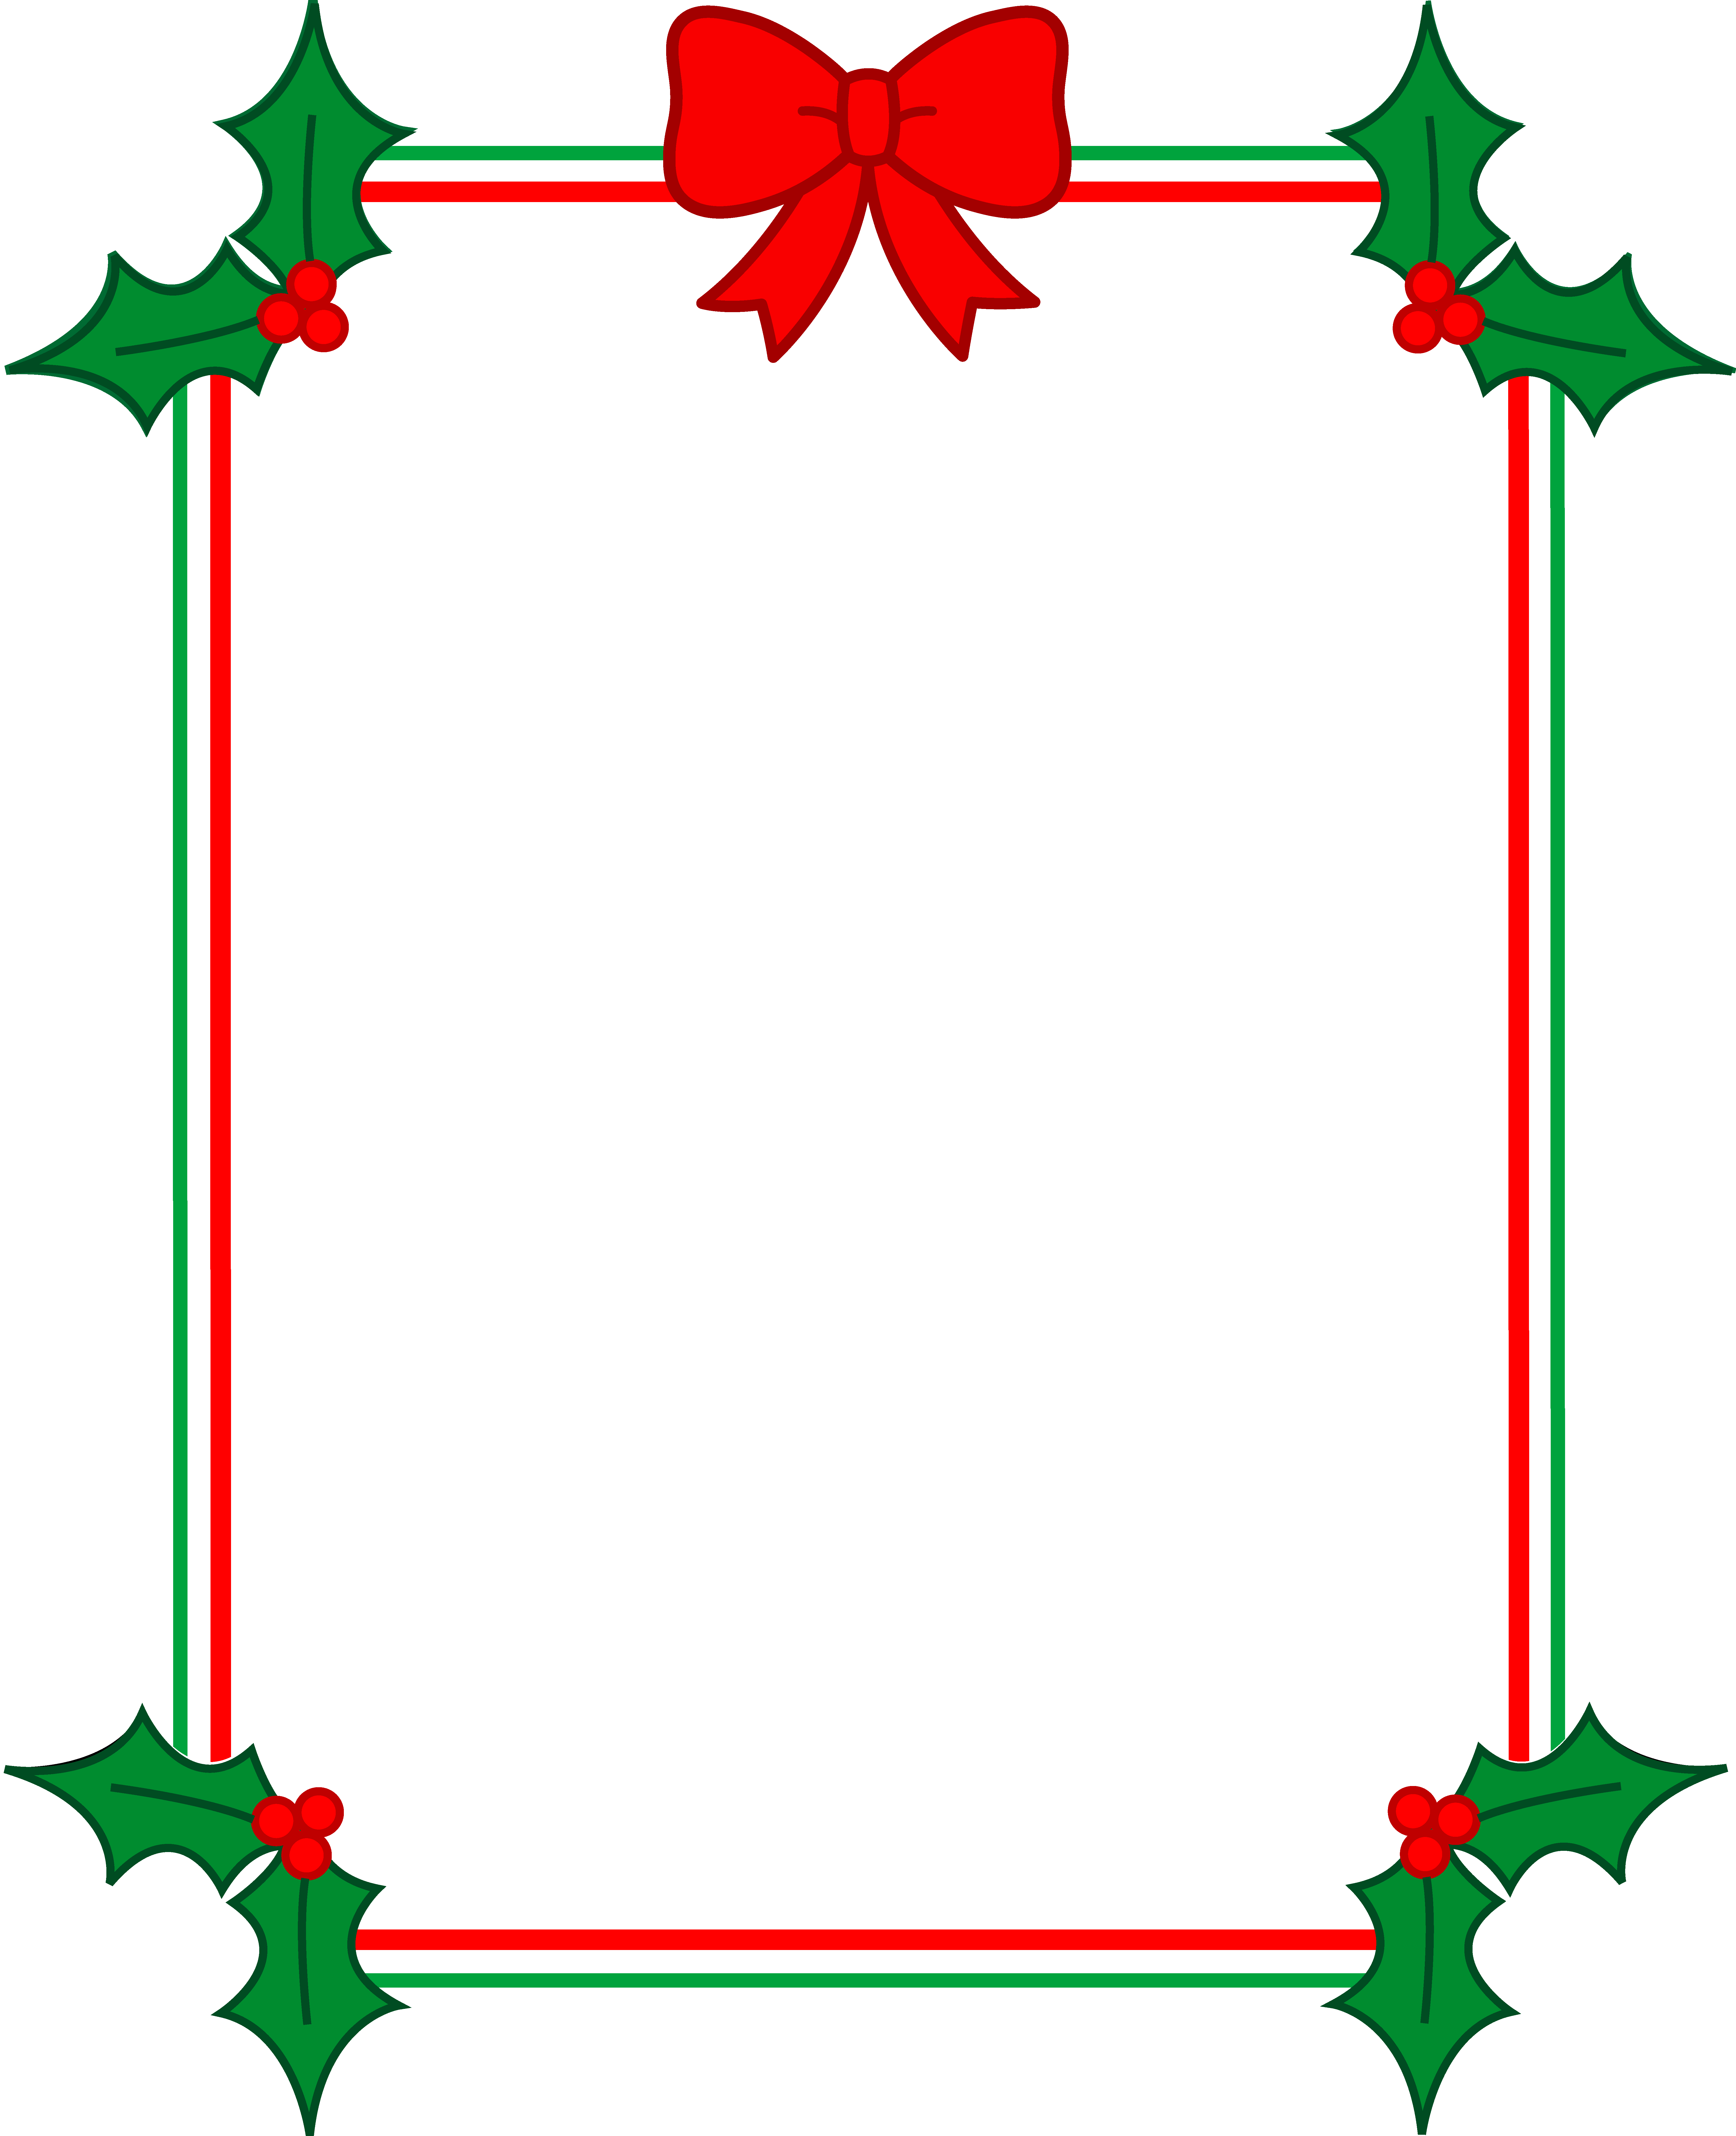 Christmas with holly and. Clipart border ribbon